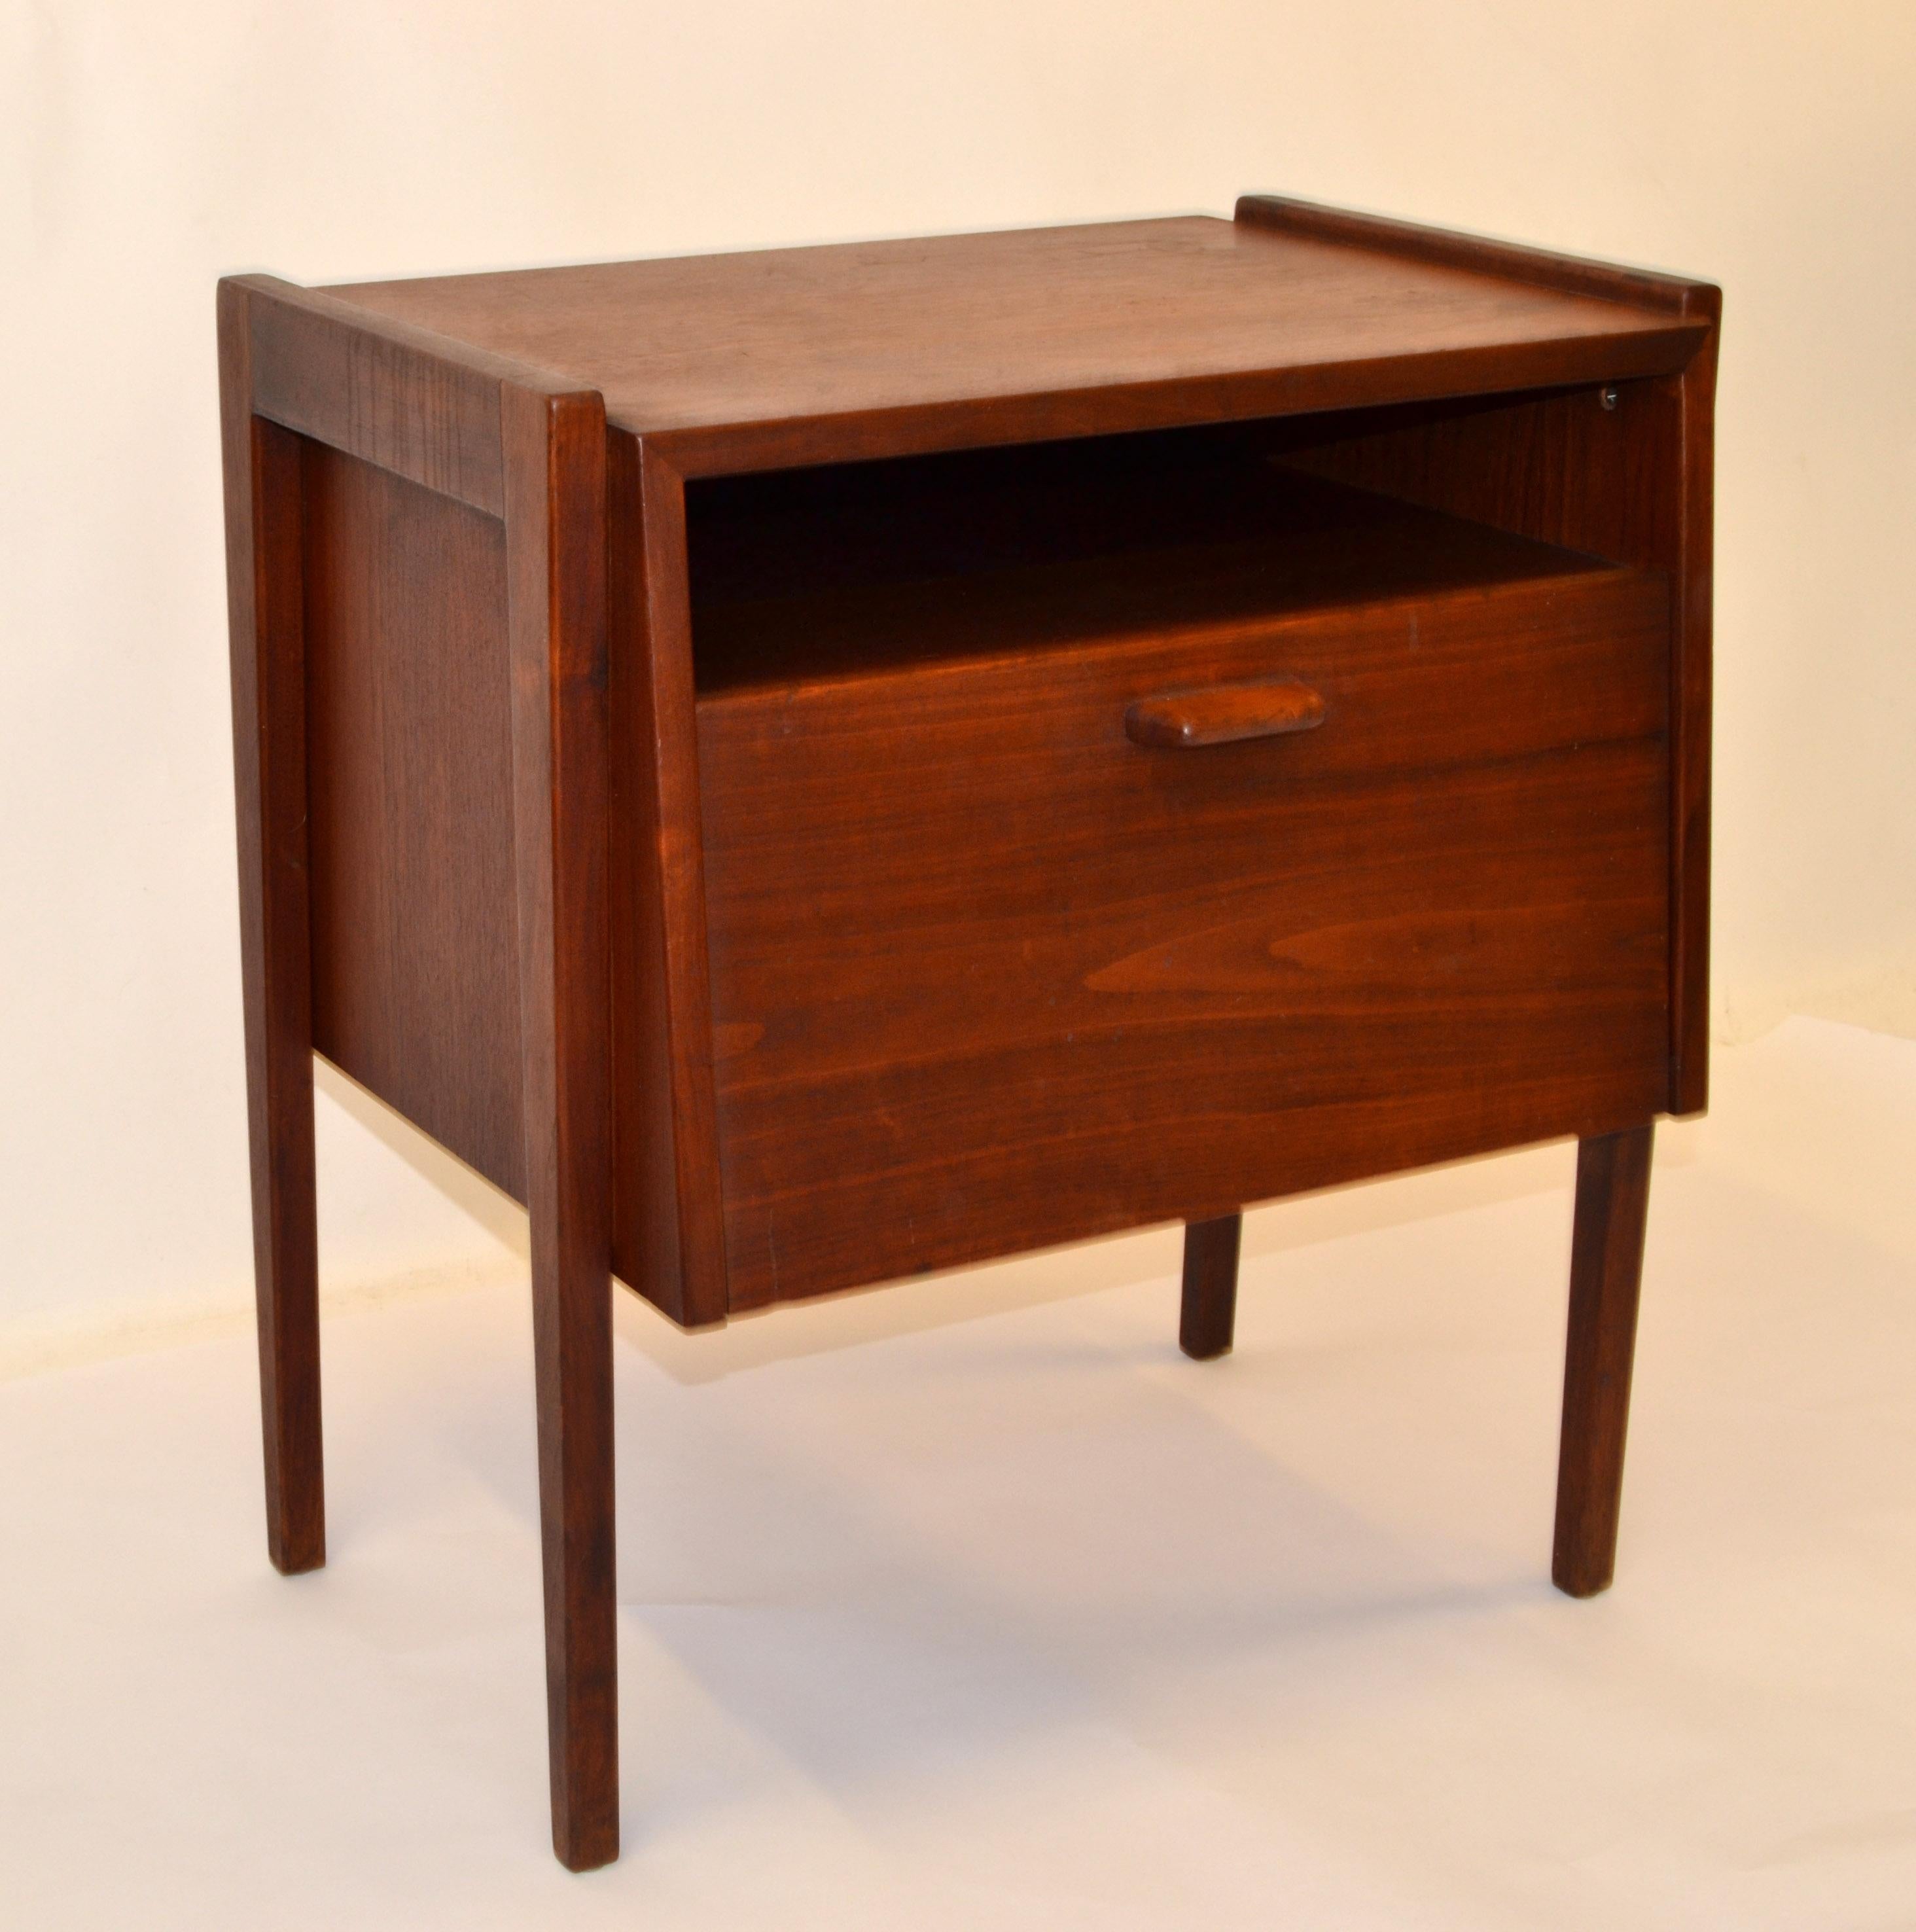 Hand-Crafted Jens Risom Scandinavian Modern Two-Tone Walnut Nightstand Bedside End Table 1950 For Sale